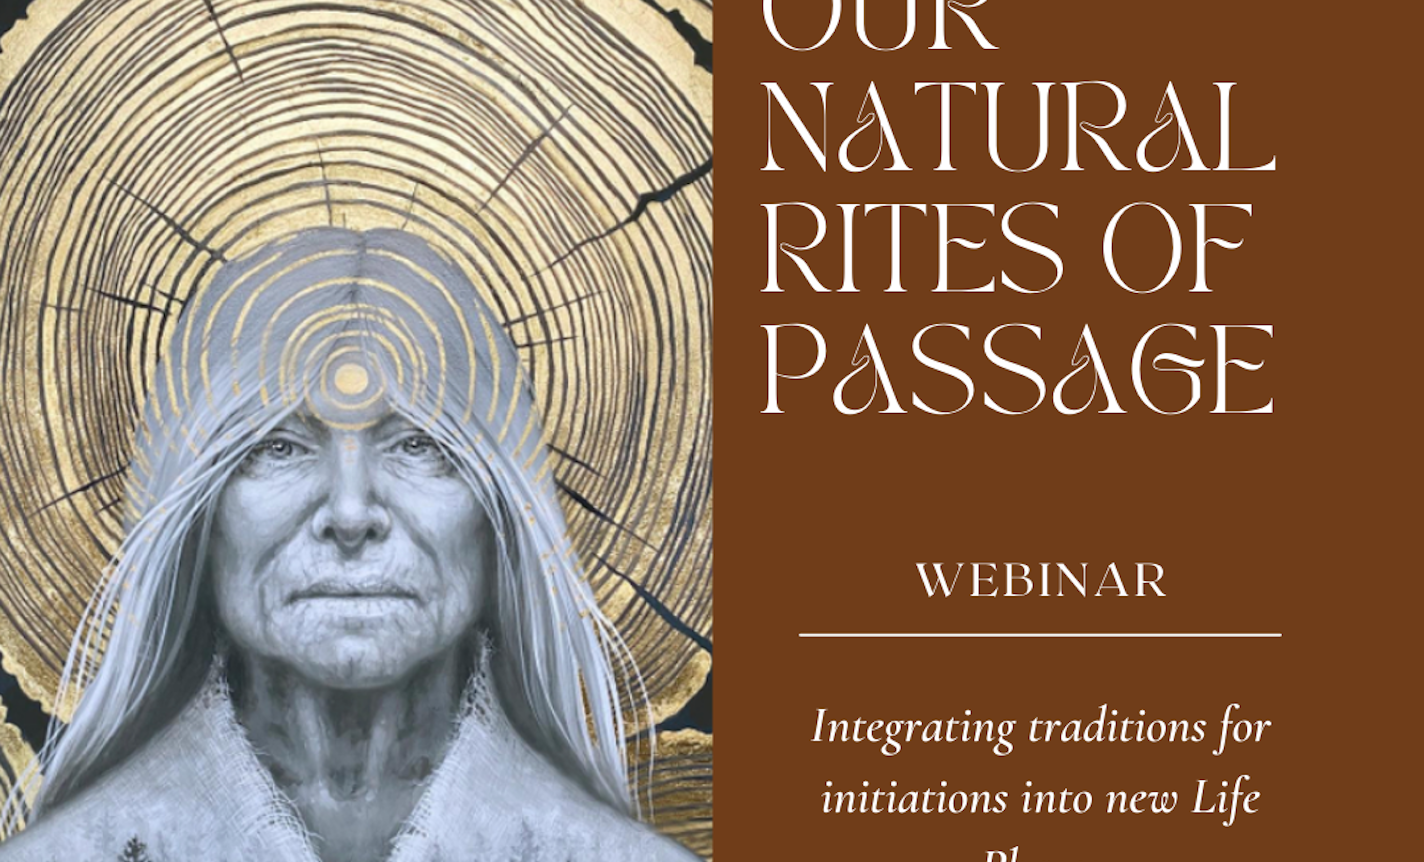 OUR NATURAL RITES OF PASSAGE